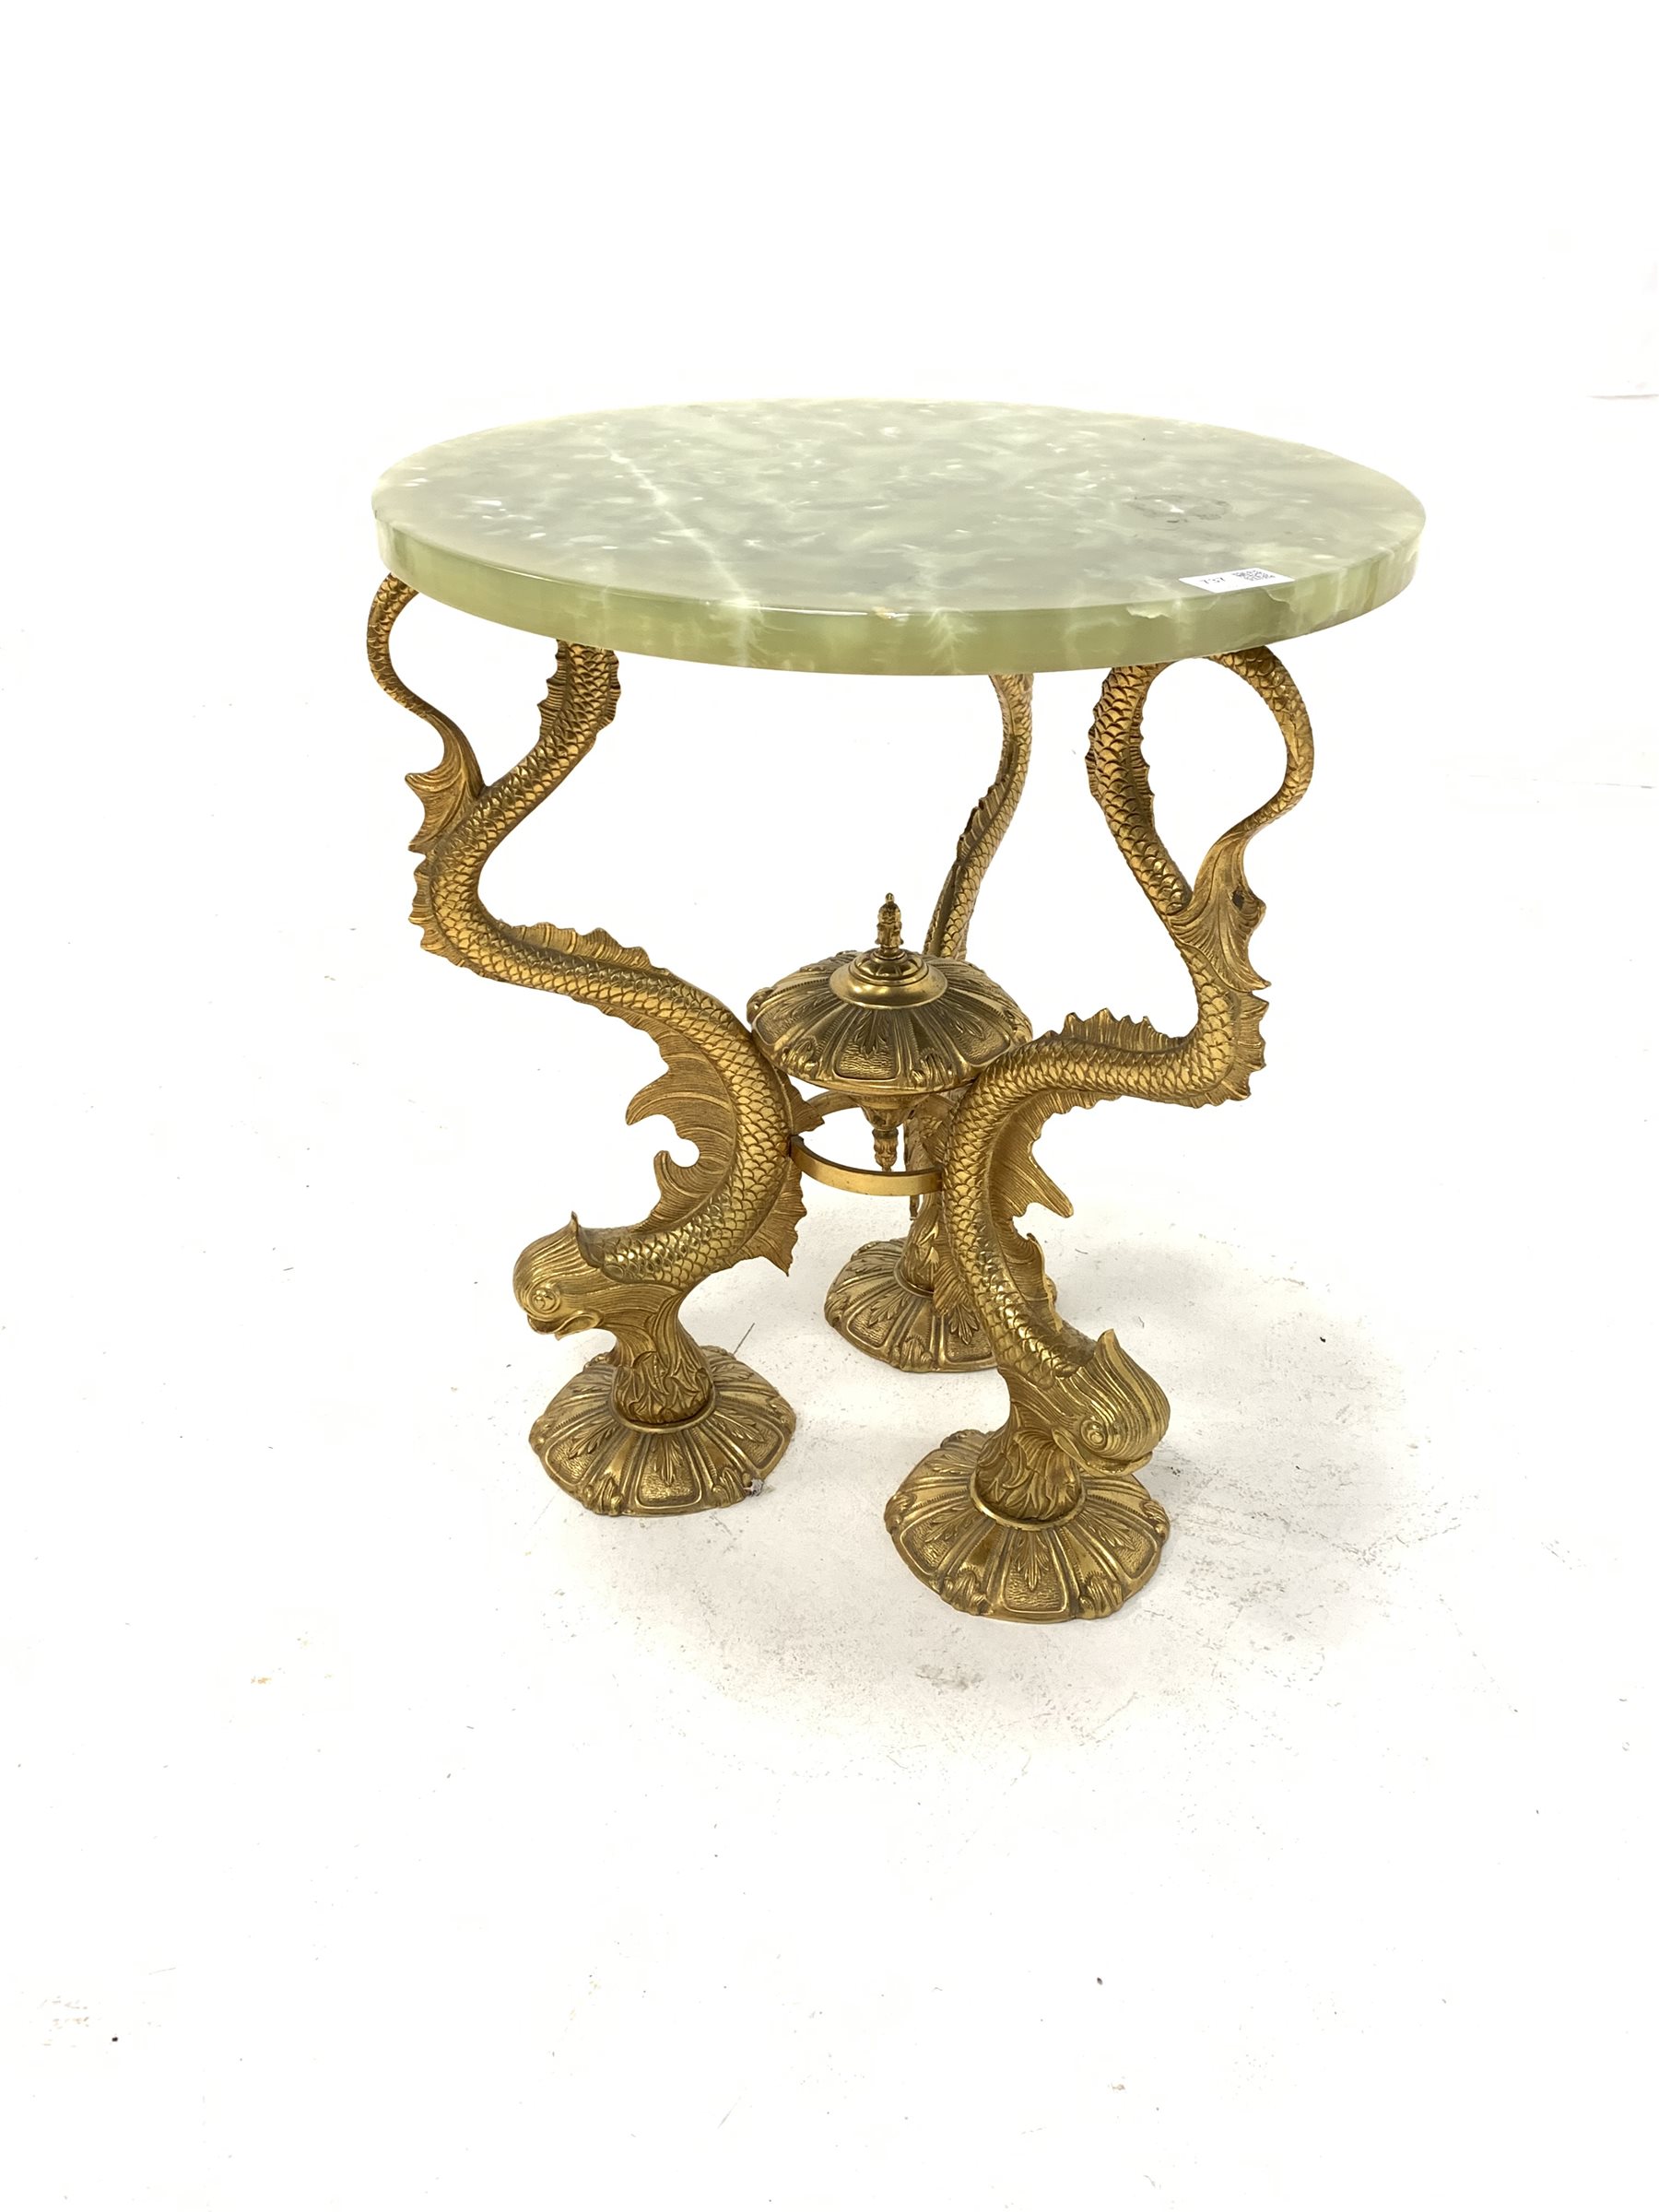 Brass and onyx circular table, cast base in the form of three mythical fish